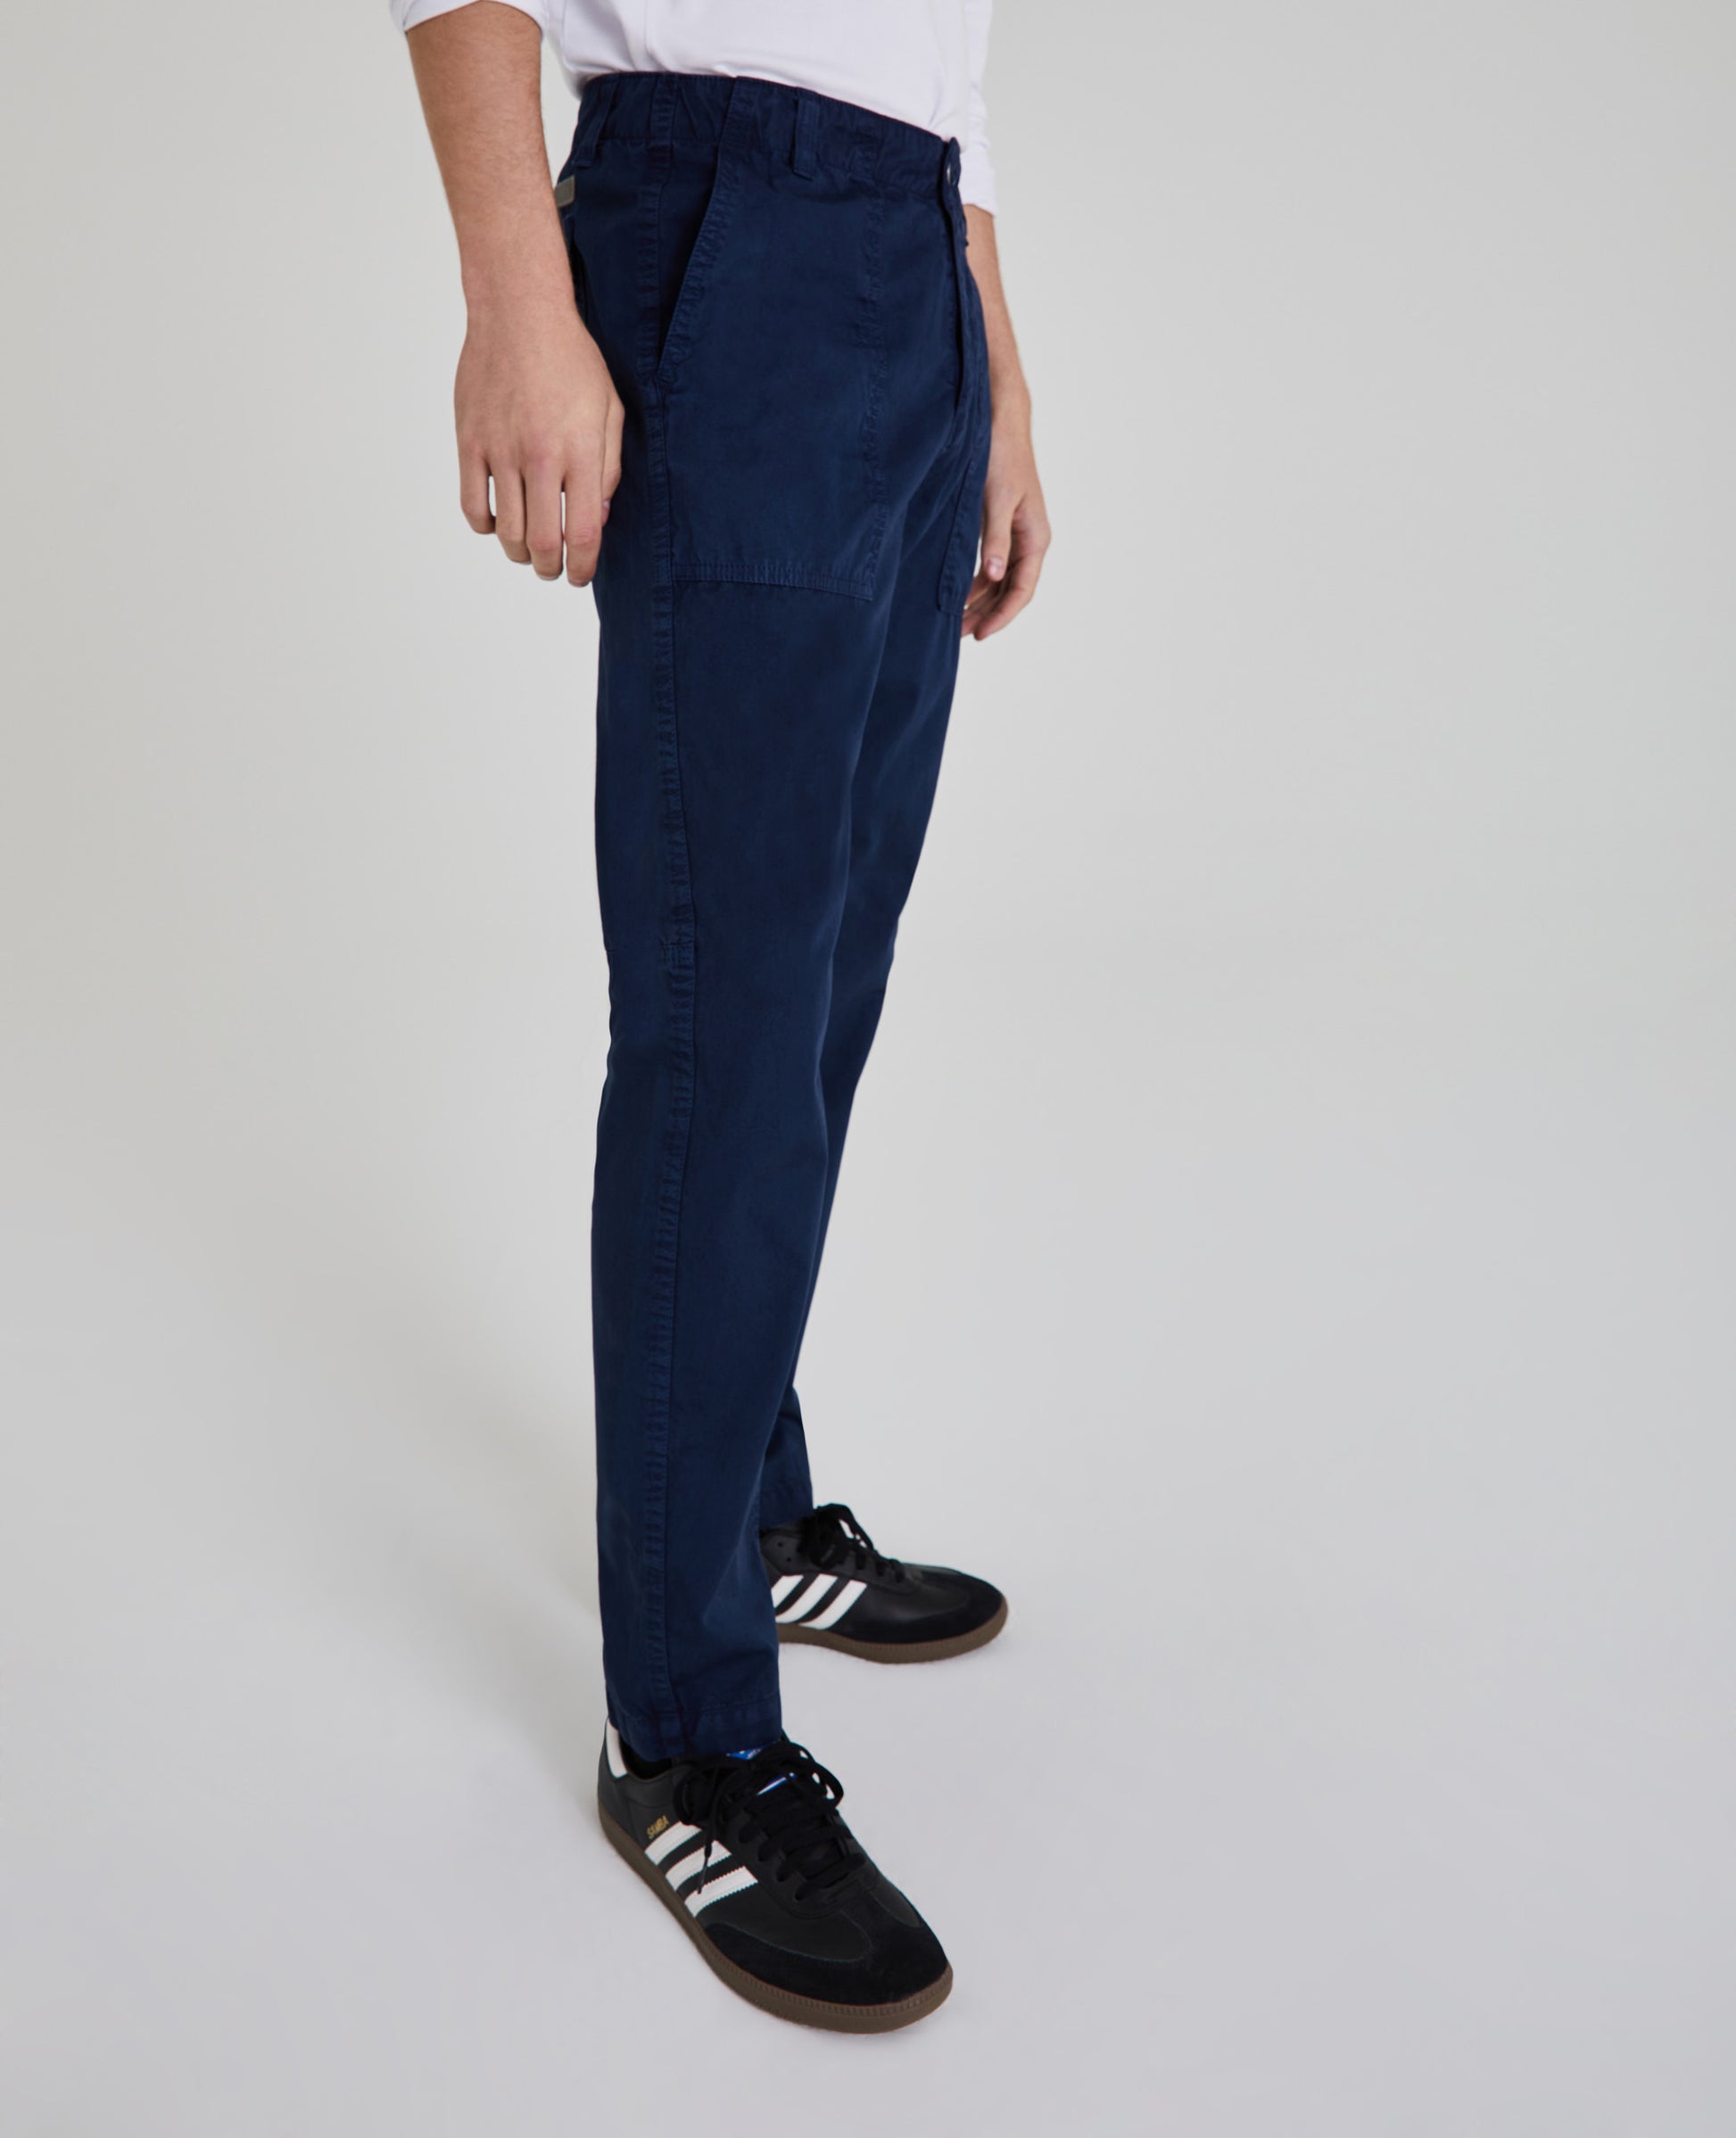 Clyfton Fatigue Sulfur Midnight Berlin Relaxed Tapered Men Bottoms Photo 6